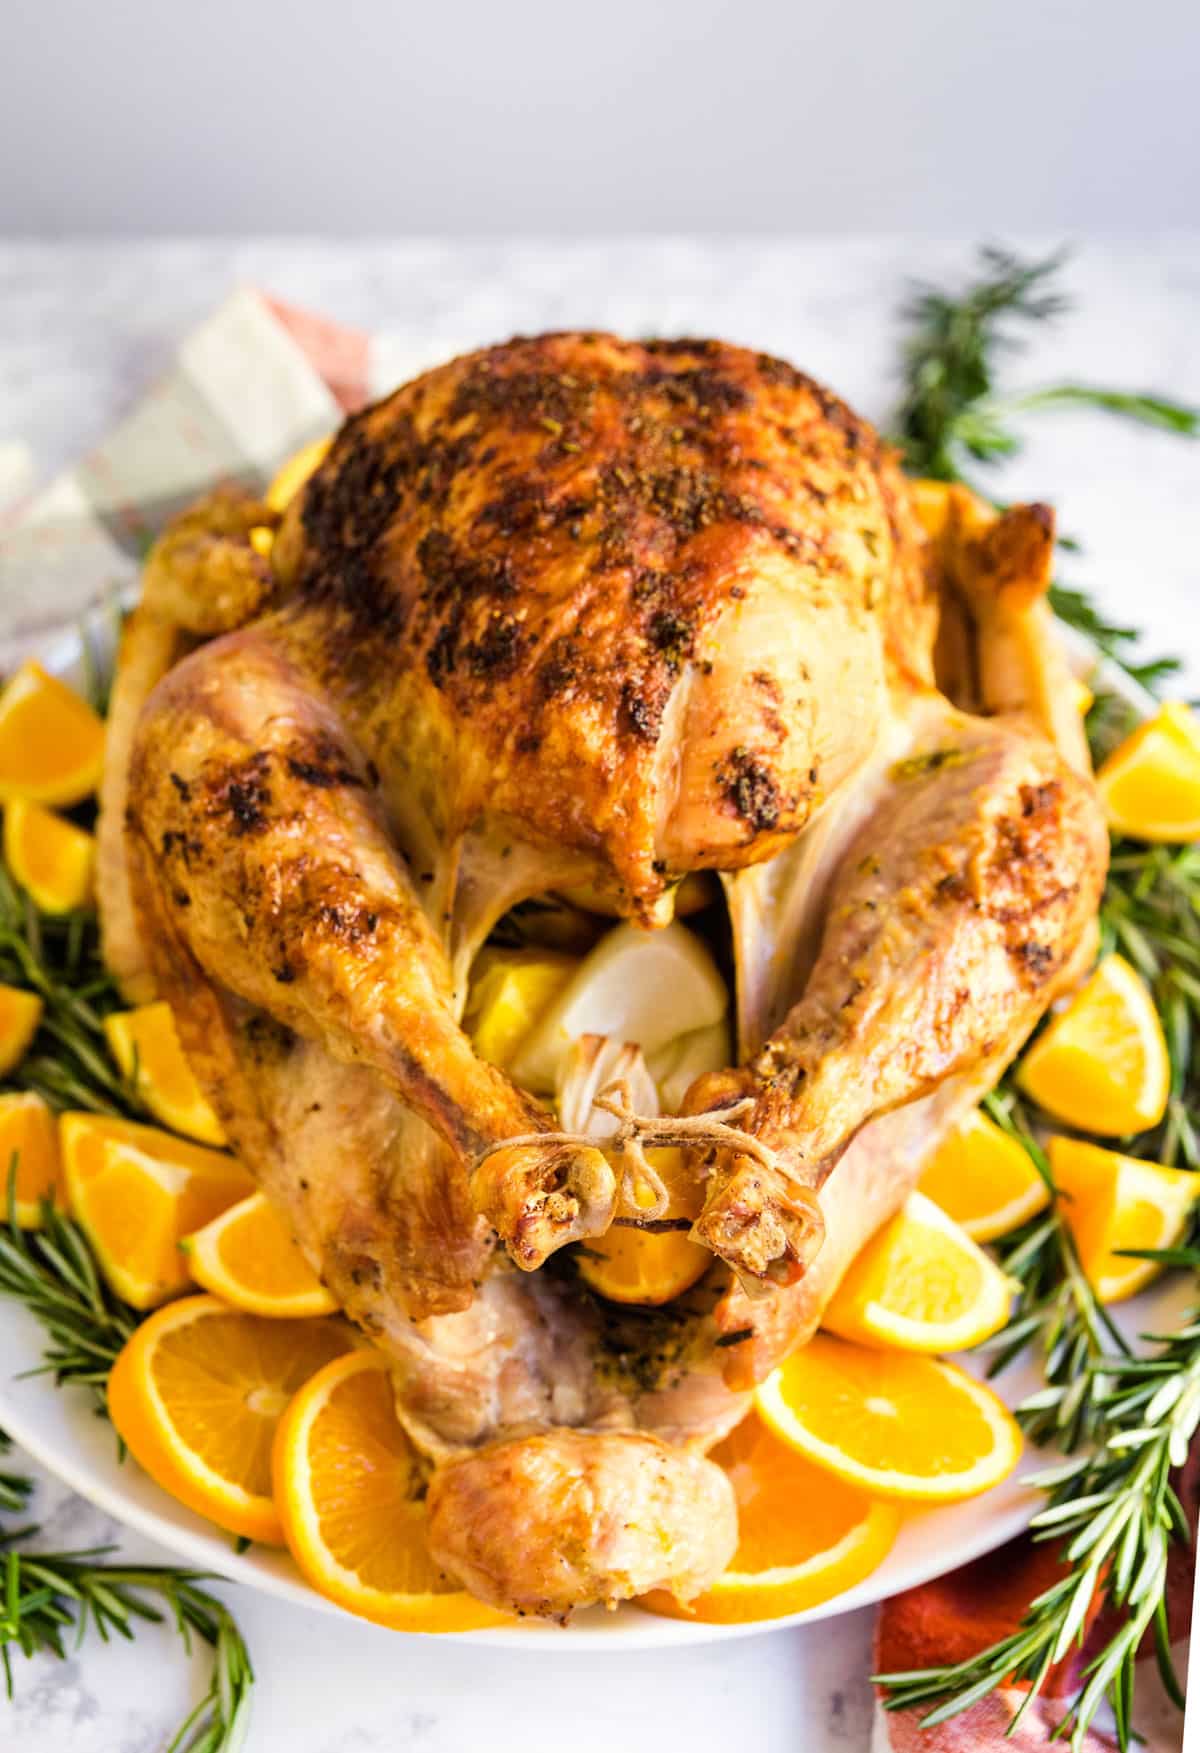 A whole turkey on a platter atop oranges and rosemary.